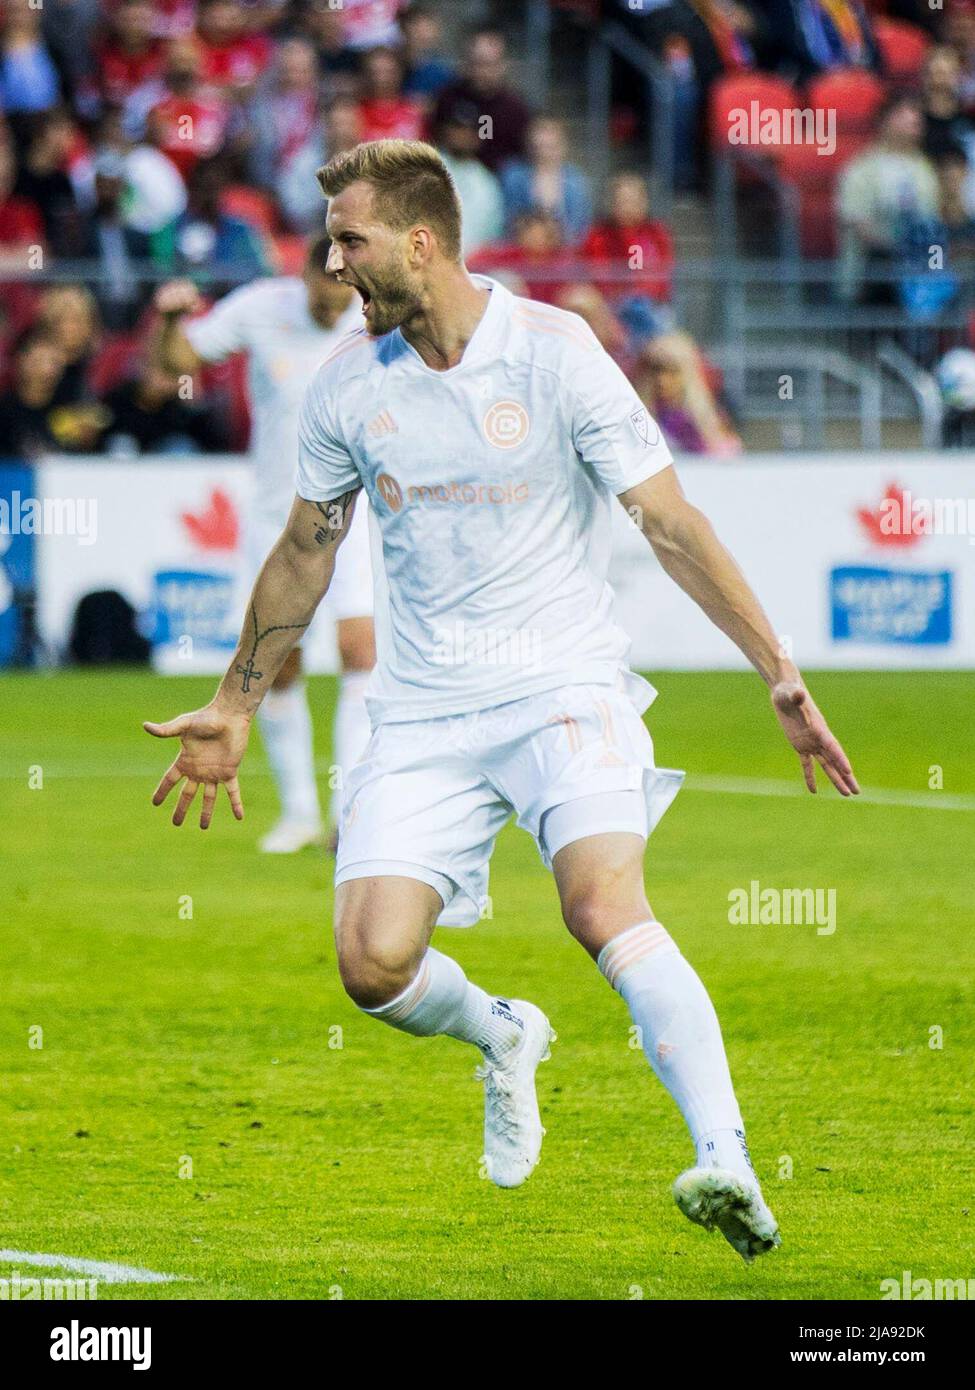 Toronto, Canada. 28th May, 2022. Kacper Przybylko of Chicago Fire celebrates scoring during the 2022 Major League Soccer (MLS) match between Chicago Fire and Toronto FC at BMO Field in Toronto, Canada, on May 28, 2022. Credit: Zou Zheng/Xinhua/Alamy Live News Stock Photo